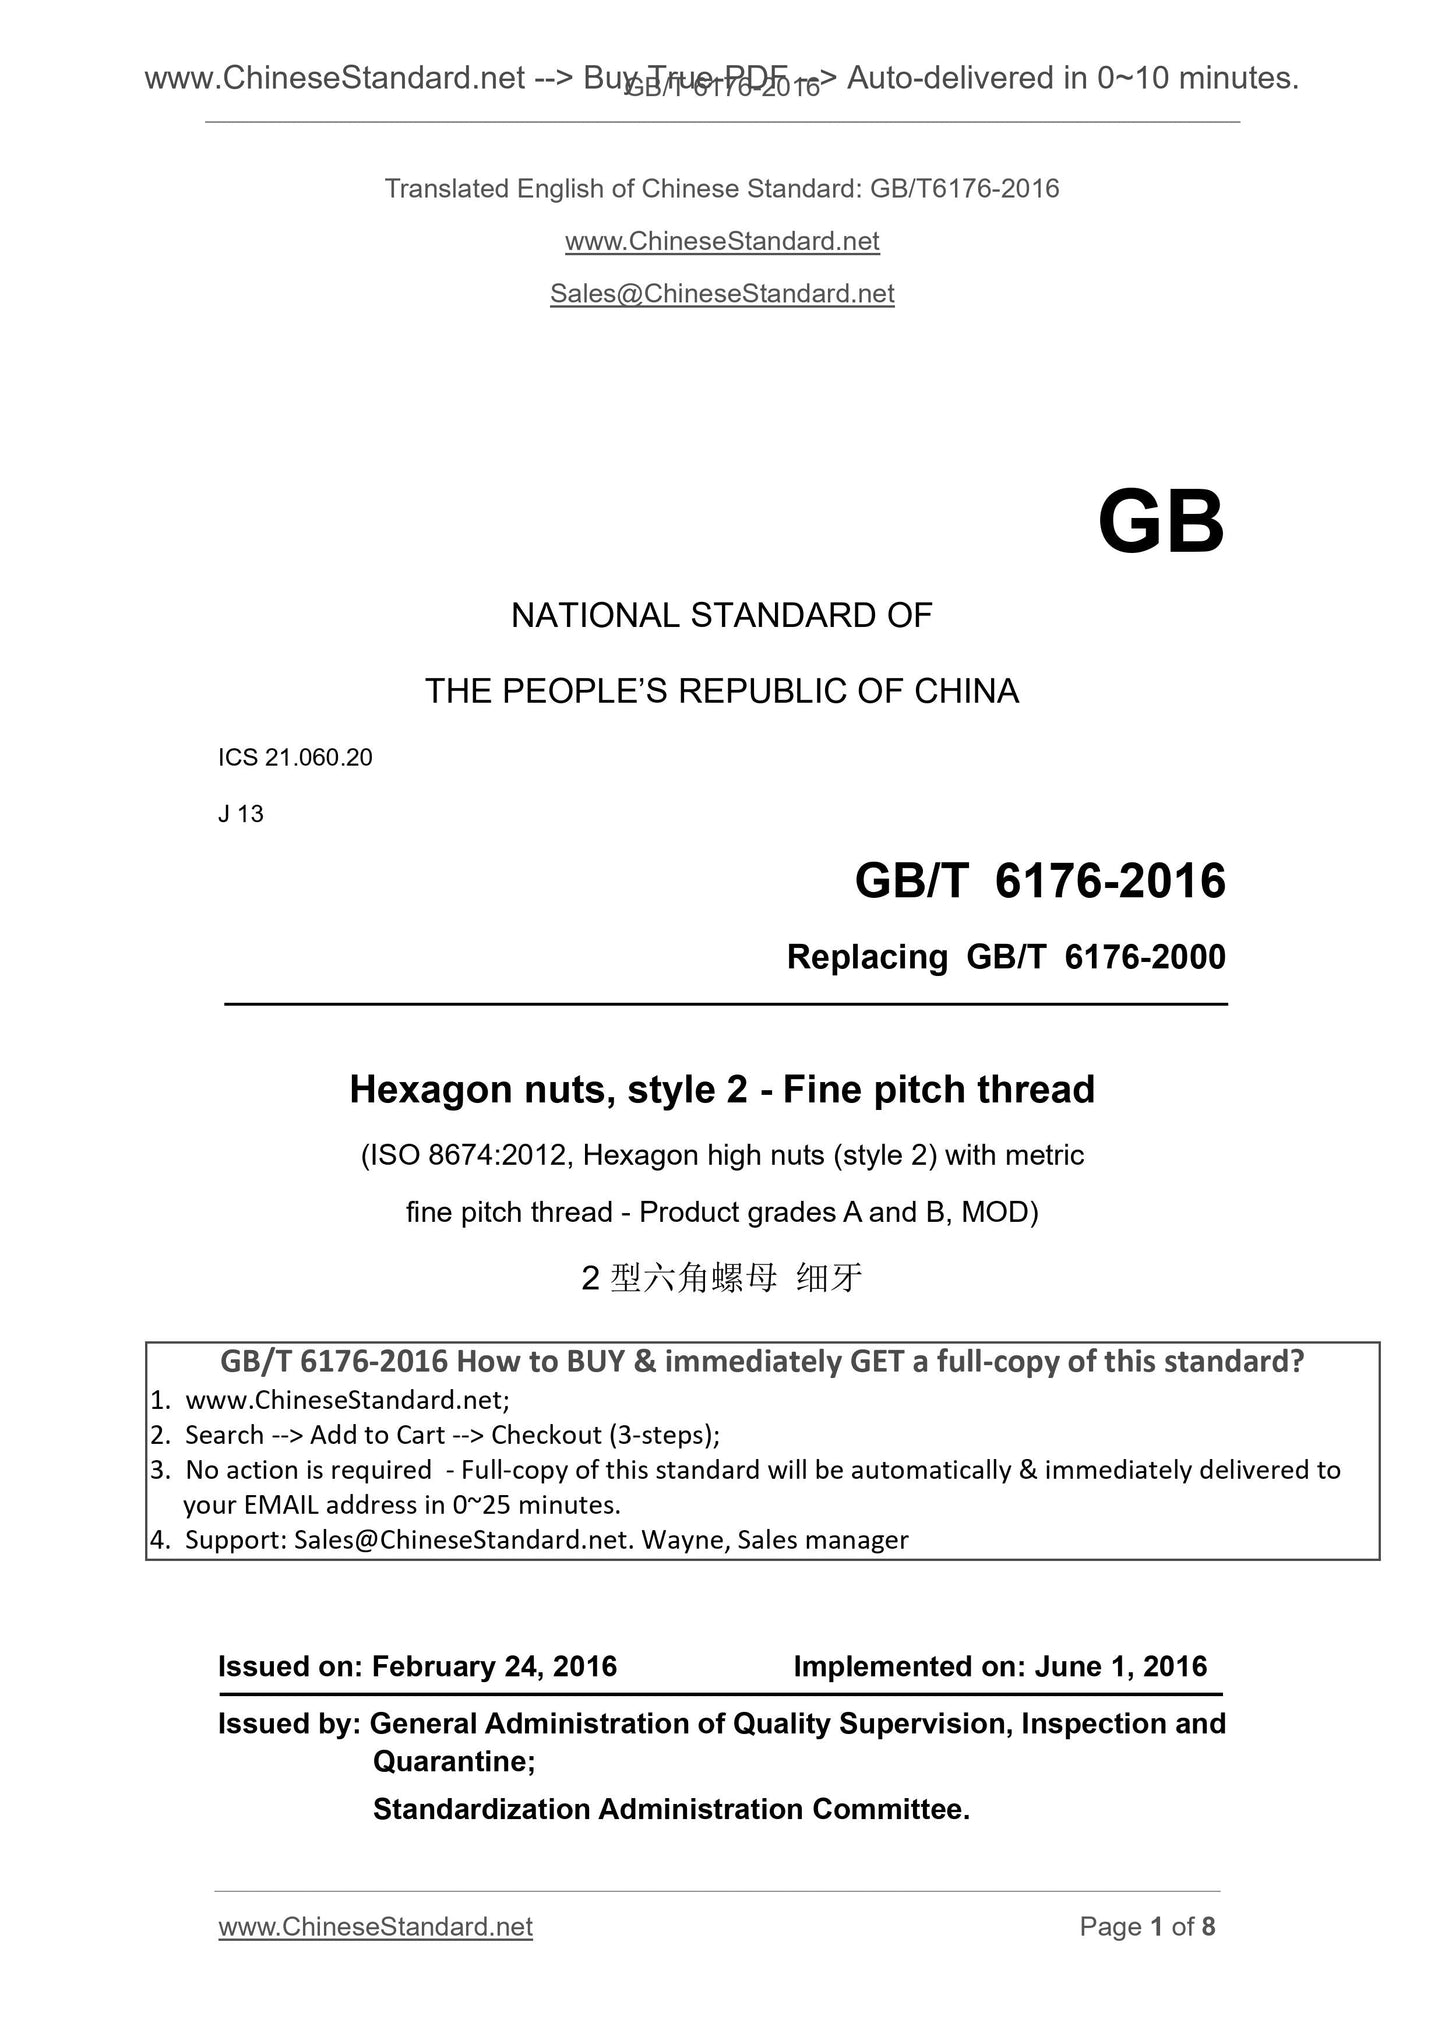 GB/T 6176-2016 Page 1